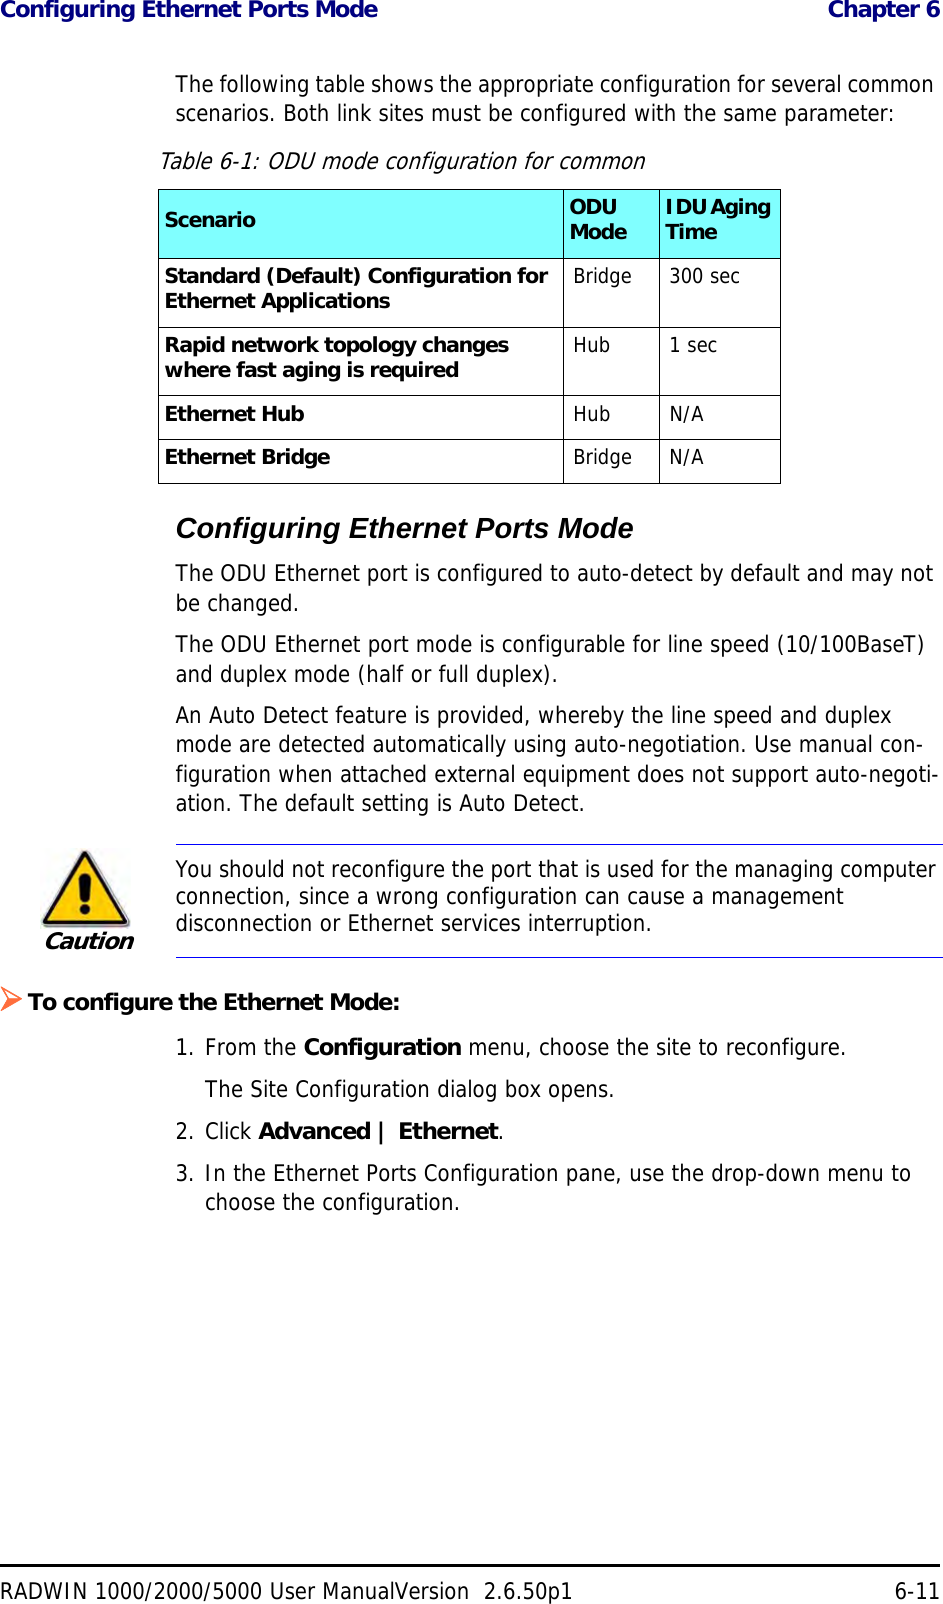 Configuring Ethernet Ports Mode  Chapter 6RADWIN 1000/2000/5000 User ManualVersion  2.6.50p1 6-11The following table shows the appropriate configuration for several common scenarios. Both link sites must be configured with the same parameter:Configuring Ethernet Ports ModeThe ODU Ethernet port is configured to auto-detect by default and may not be changed.The ODU Ethernet port mode is configurable for line speed (10/100BaseT) and duplex mode (half or full duplex).An Auto Detect feature is provided, whereby the line speed and duplex mode are detected automatically using auto-negotiation. Use manual con-figuration when attached external equipment does not support auto-negoti-ation. The default setting is Auto Detect.To configure the Ethernet Mode:1. From the Configuration menu, choose the site to reconfigure.The Site Configuration dialog box opens.2. Click Advanced | Ethernet.3. In the Ethernet Ports Configuration pane, use the drop-down menu to choose the configuration.Table 6-1: ODU mode configuration for commonScenario ODU Mode IDU Aging TimeStandard (Default) Configuration for Ethernet Applications Bridge 300 secRapid network topology changes where fast aging is required Hub 1 secEthernet Hub Hub N/AEthernet Bridge Bridge N/ACautionYou should not reconfigure the port that is used for the managing computer connection, since a wrong configuration can cause a management disconnection or Ethernet services interruption.